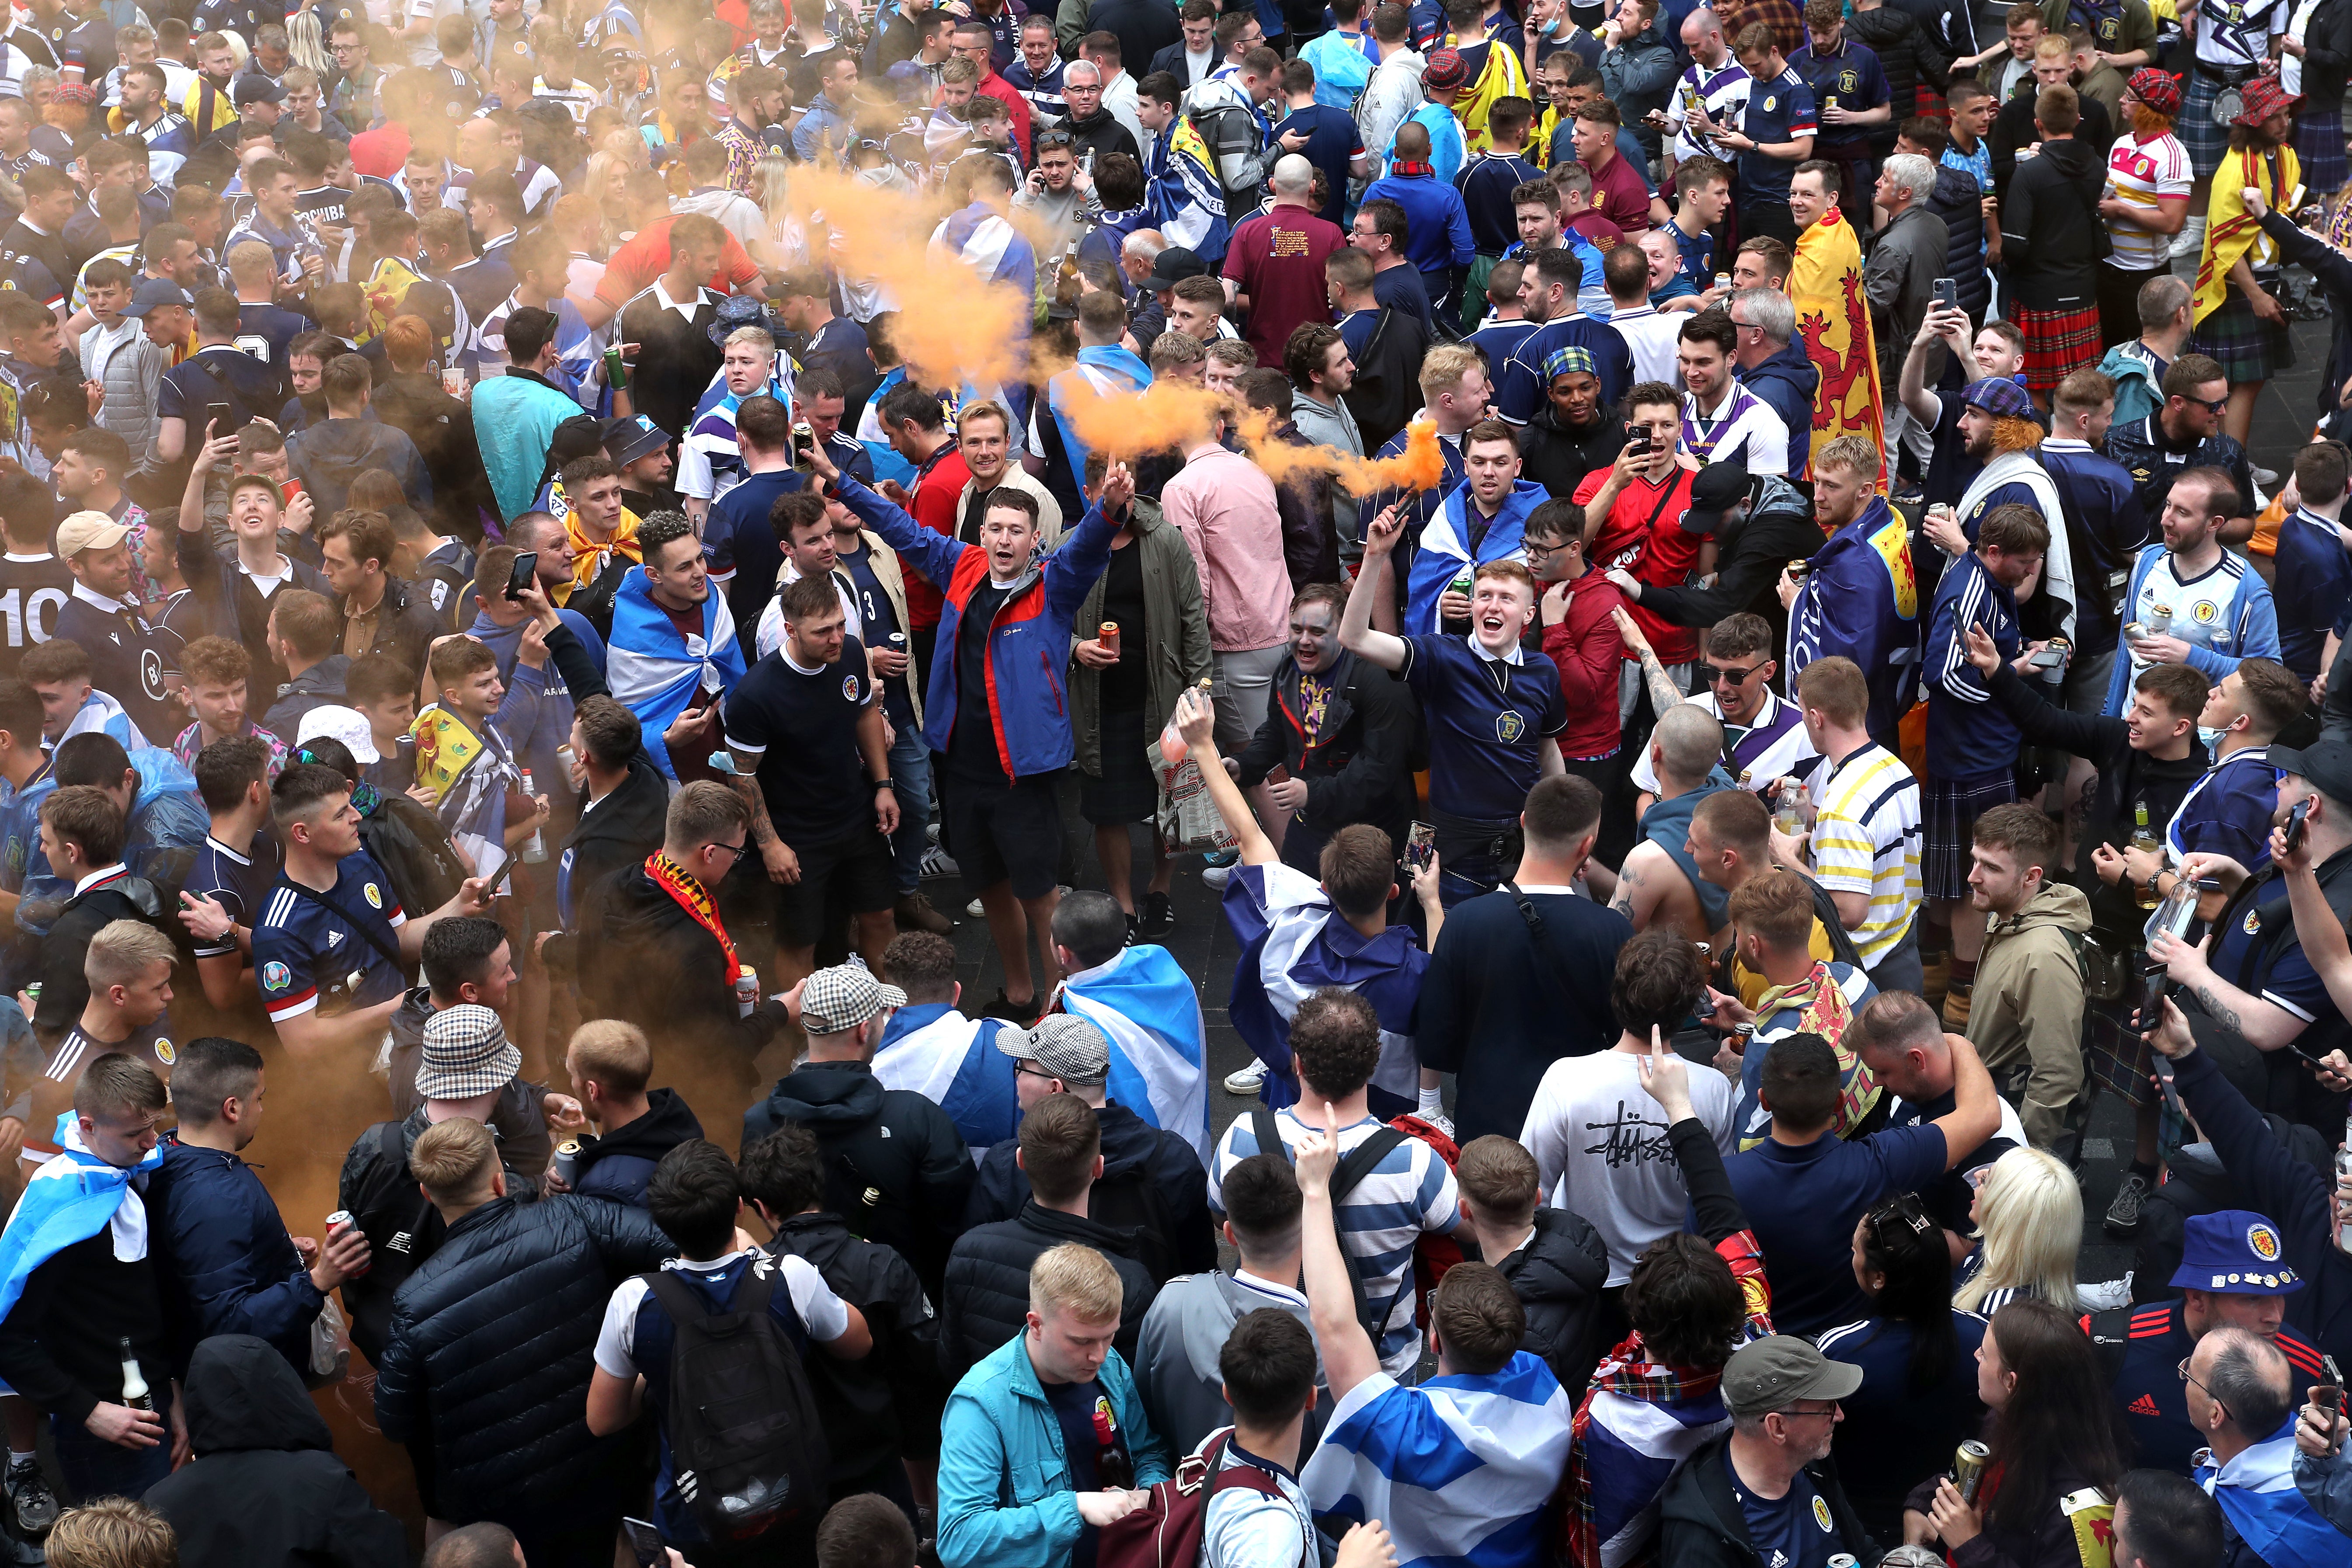 Some fans lit flares as the pre match party descended upon Leicester Square.